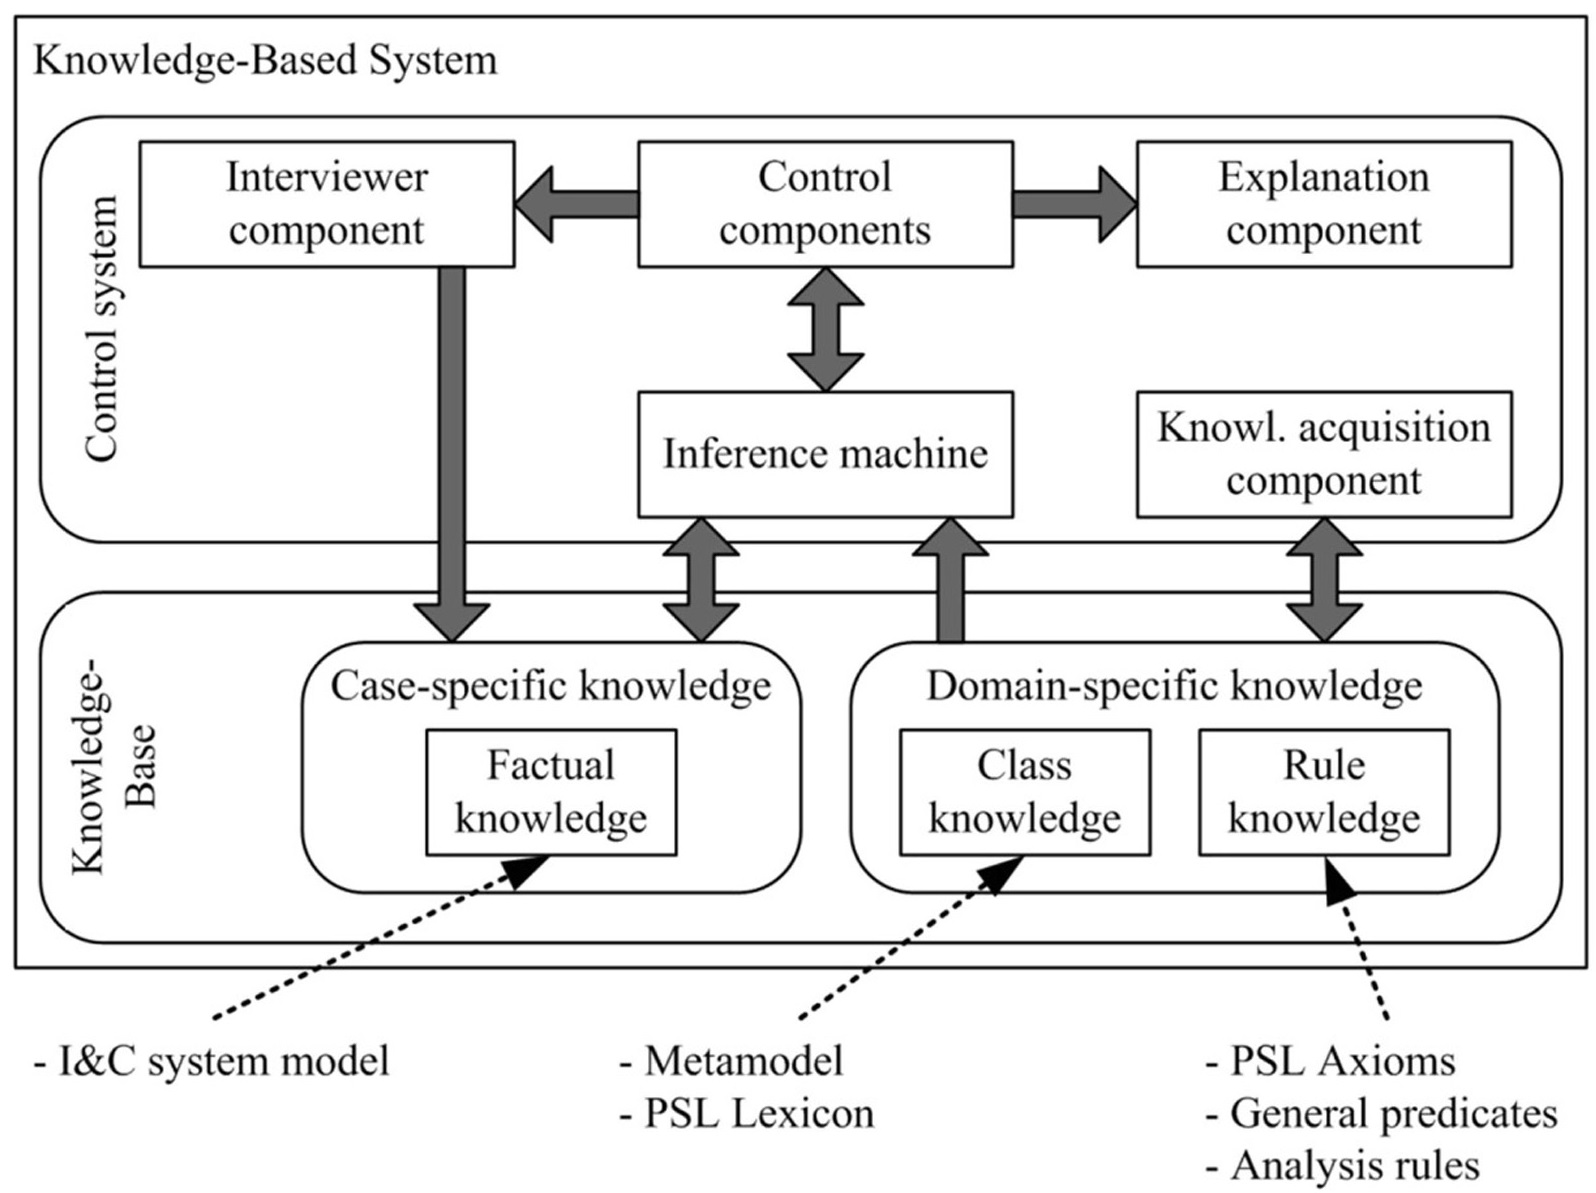 Integration of Knowledge-based Systems and the Modeling Concept for Automated Analysis